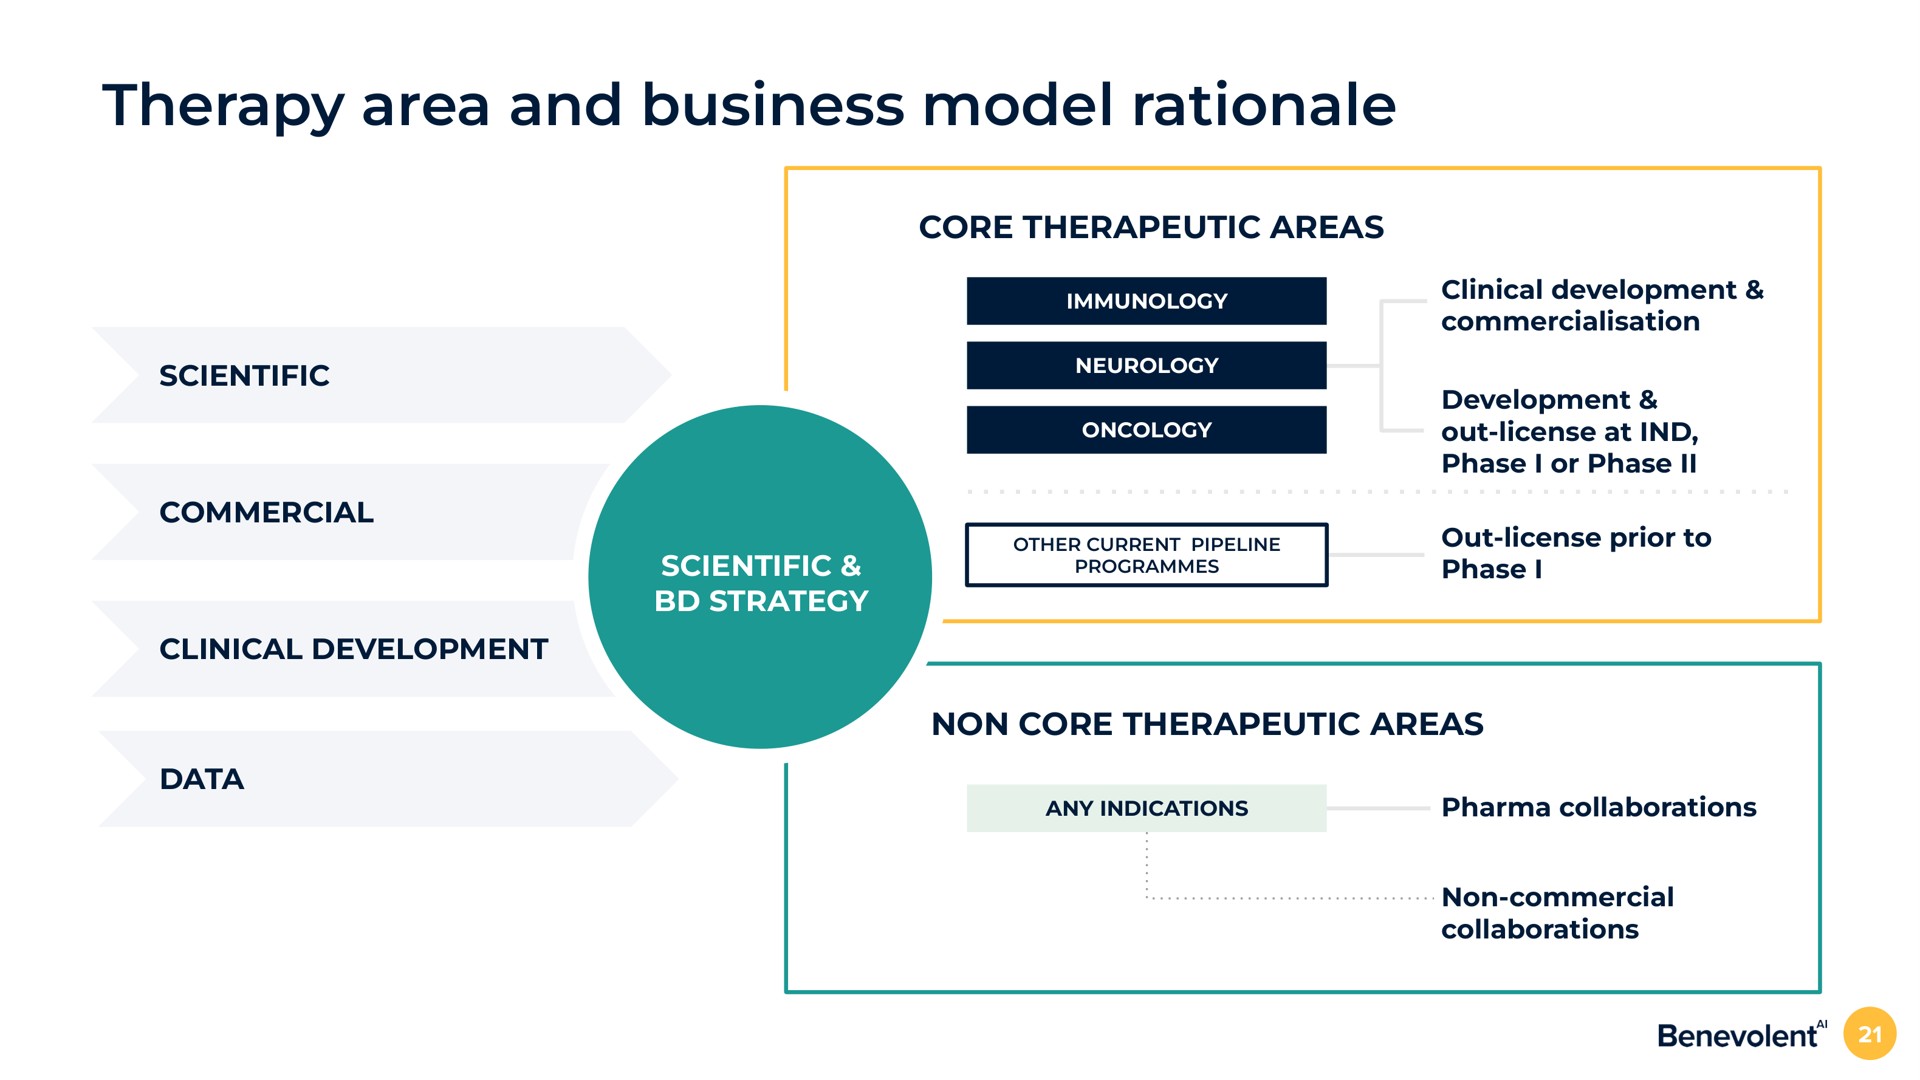 therapy area and business model rationale competitive commercial scientific commercial clinical development data core therapeutic areas clinical development development out license at phase i or phase scientific strategy out license prior to phase i non core therapeutic areas collaborations non commercial collaborations | BenevolentAI